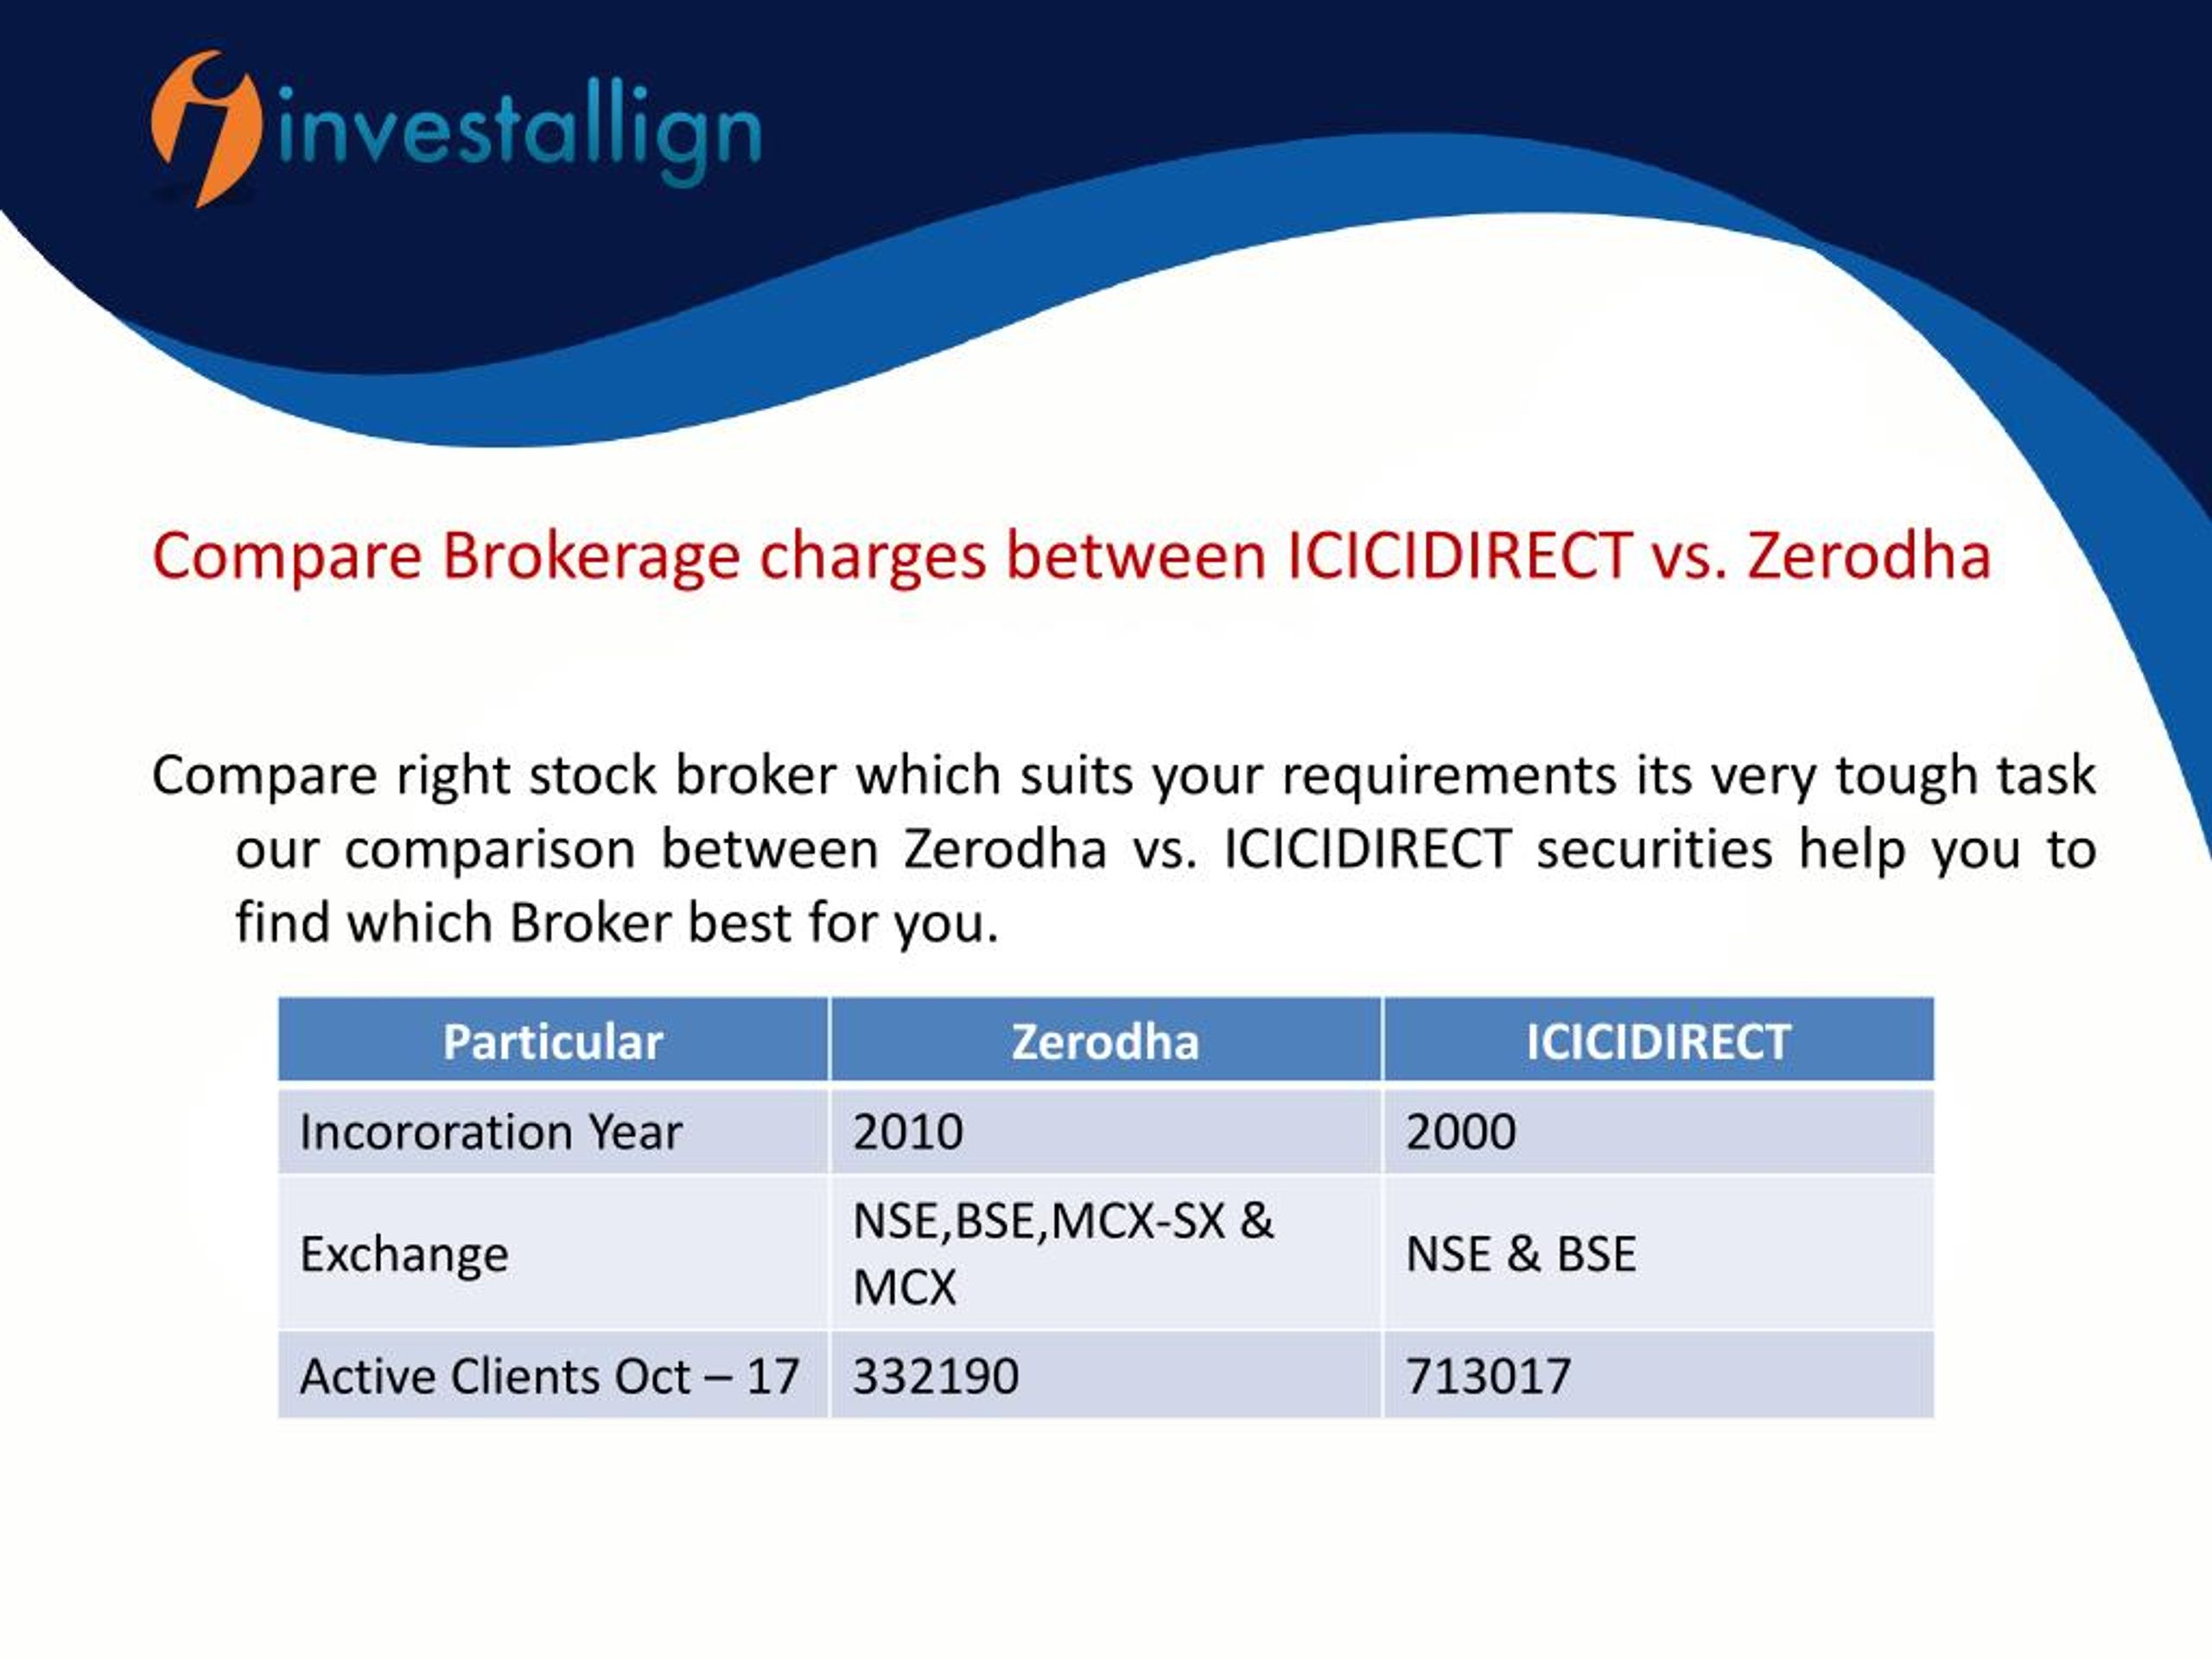 Ppt Compare Zerodha Vs Icicidirect Brokerage Charges Powerpoint Presentation Id7821942 2376